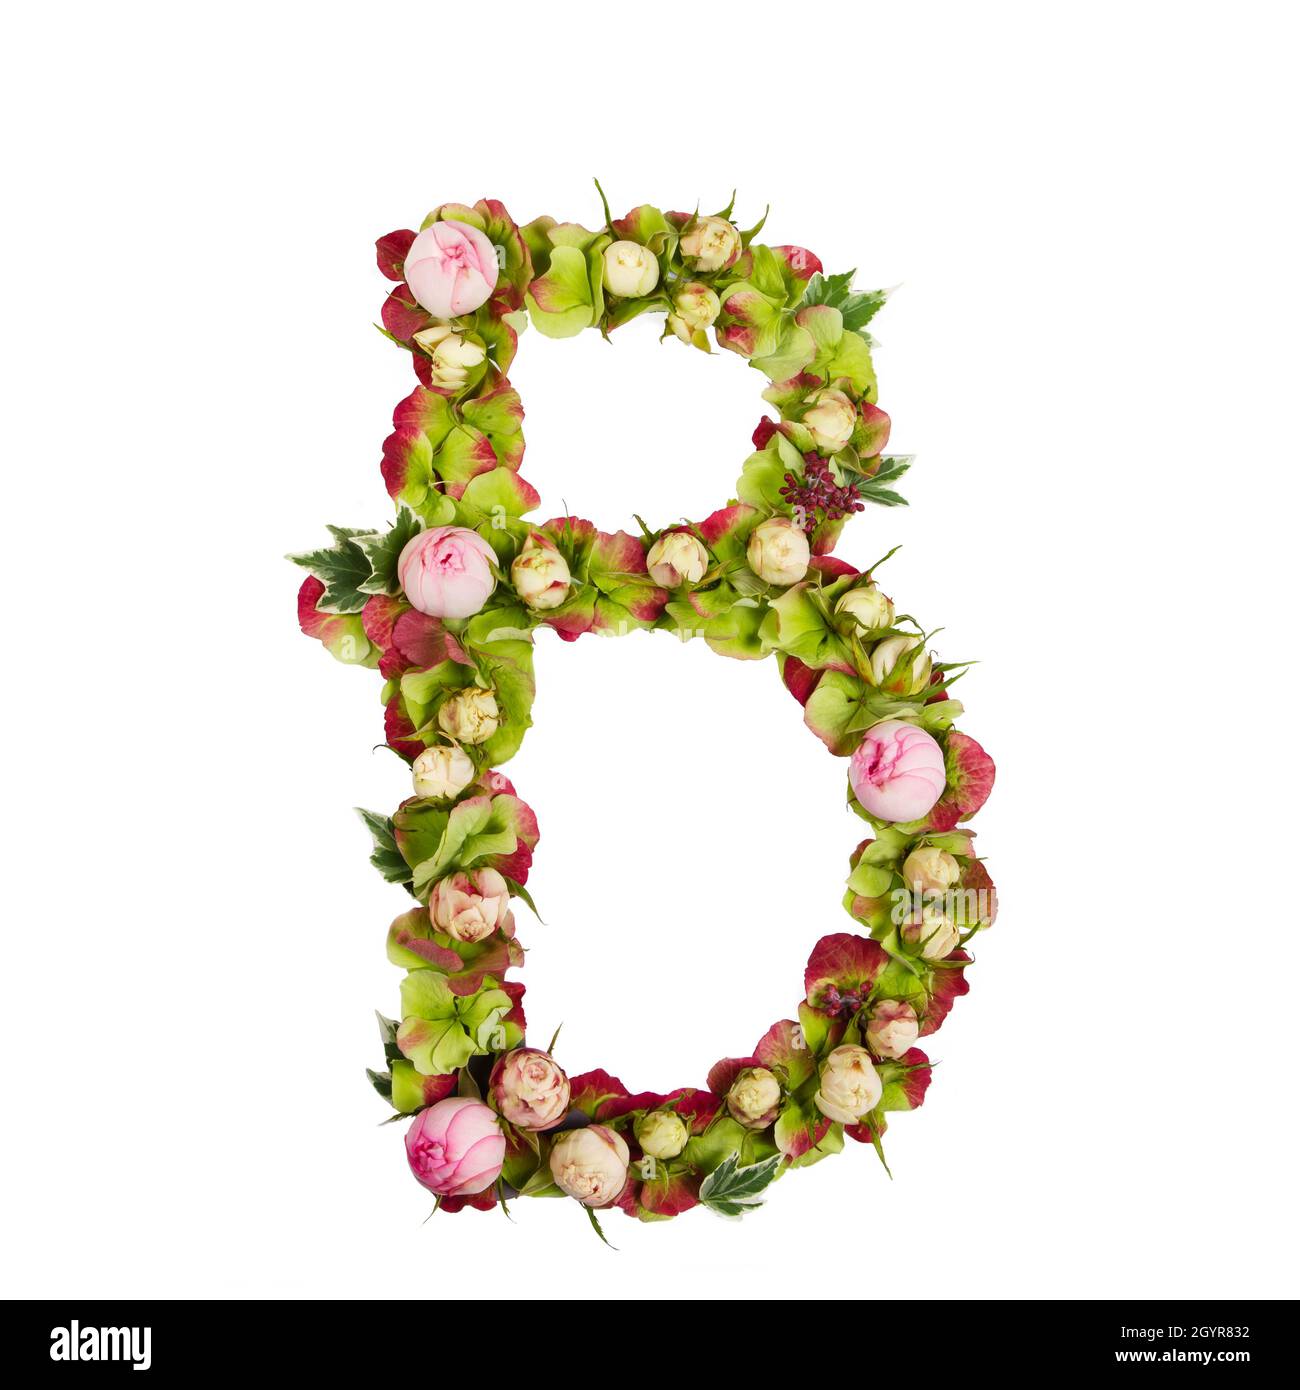 Capital Letter B Part of a set of letters, Numbers and symbols of the Alphabet made with flowers, branches and leaves on white background Stock Photo